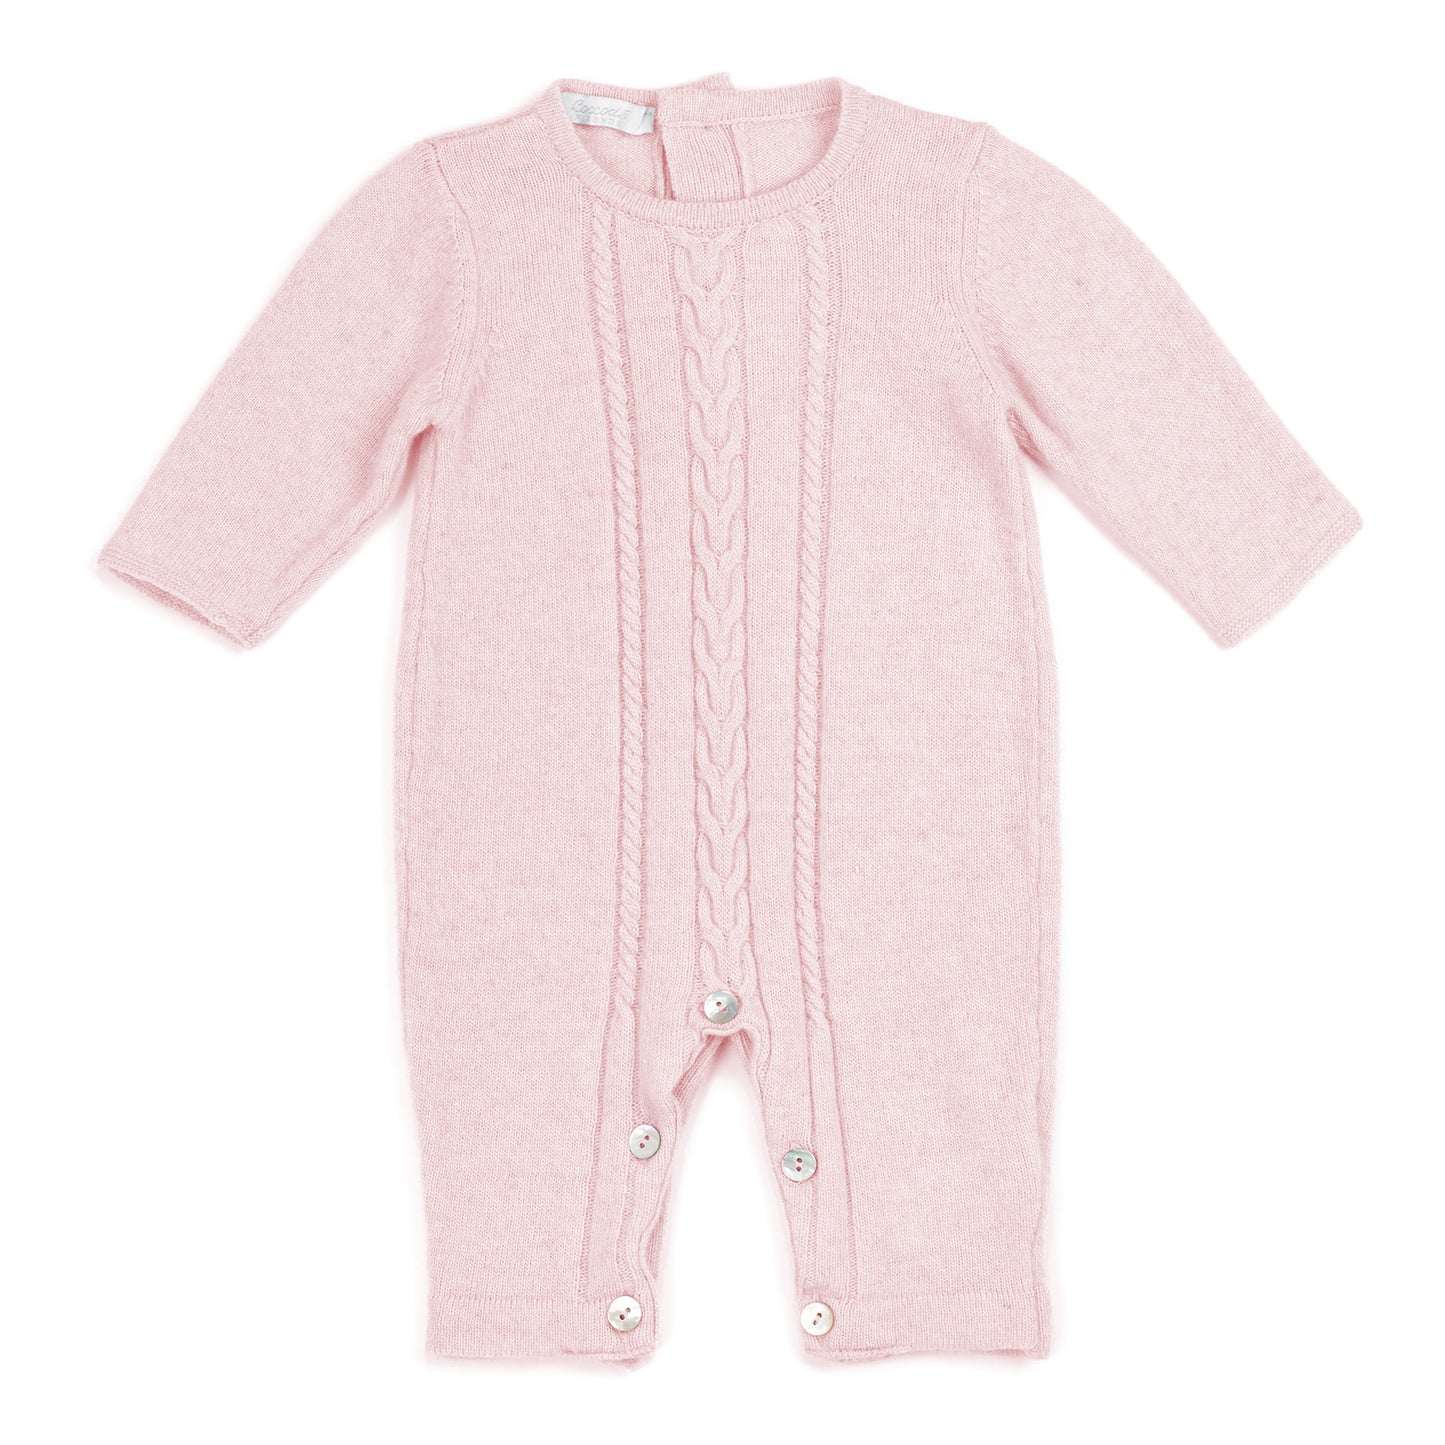 Coccodé Girls Pink Knitted Romper SALE was £34.50